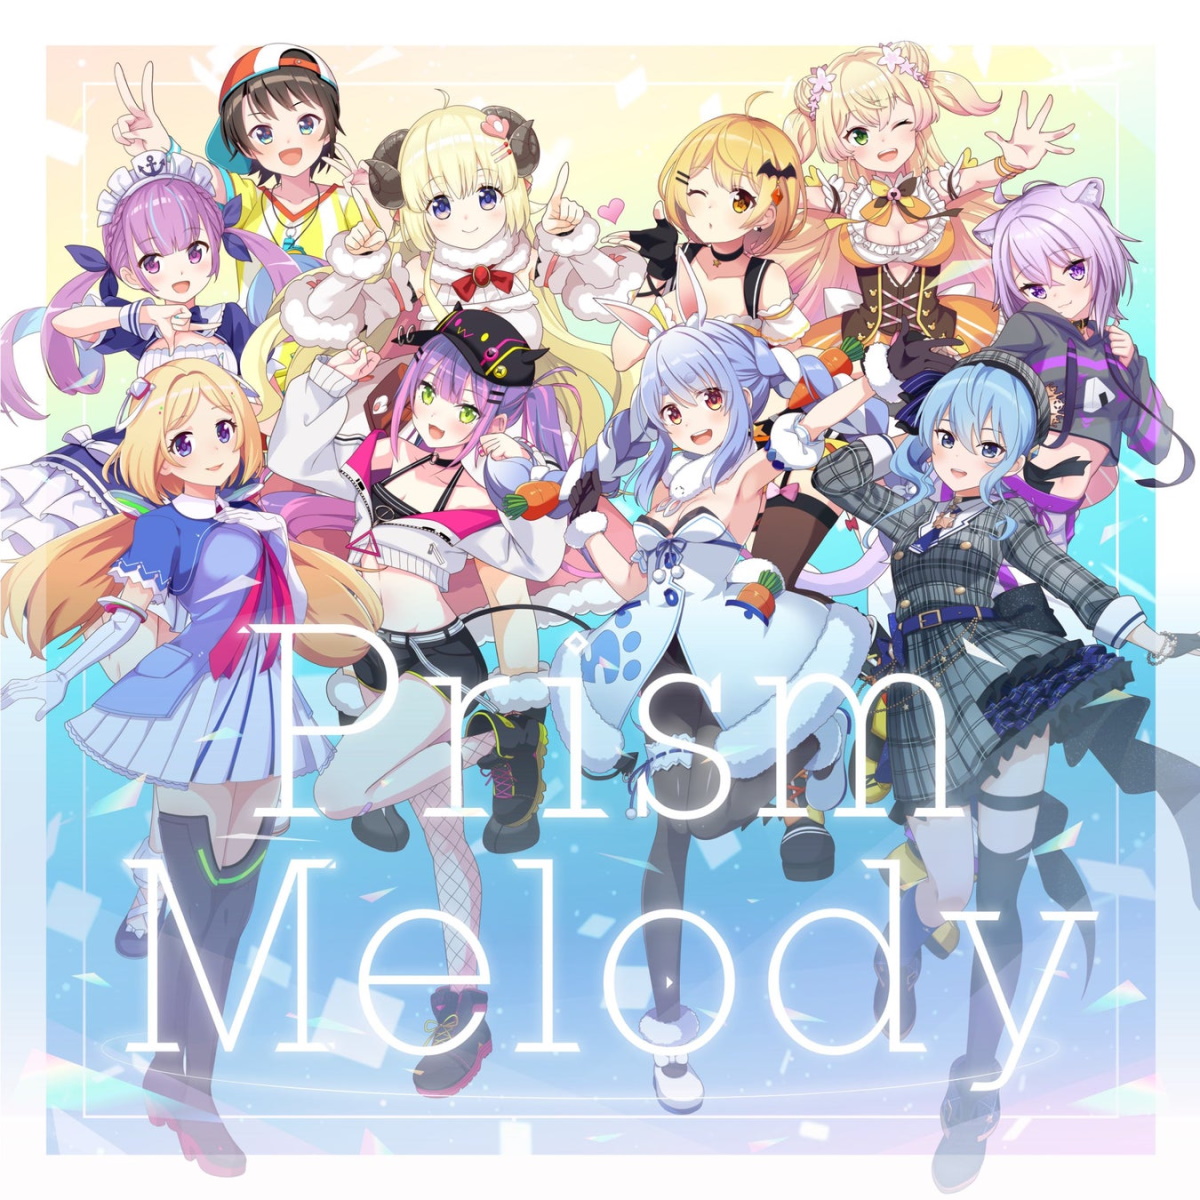 『hololive IDOL PROJECT - Prism Melody』収録の『Prism Melody』ジャケット